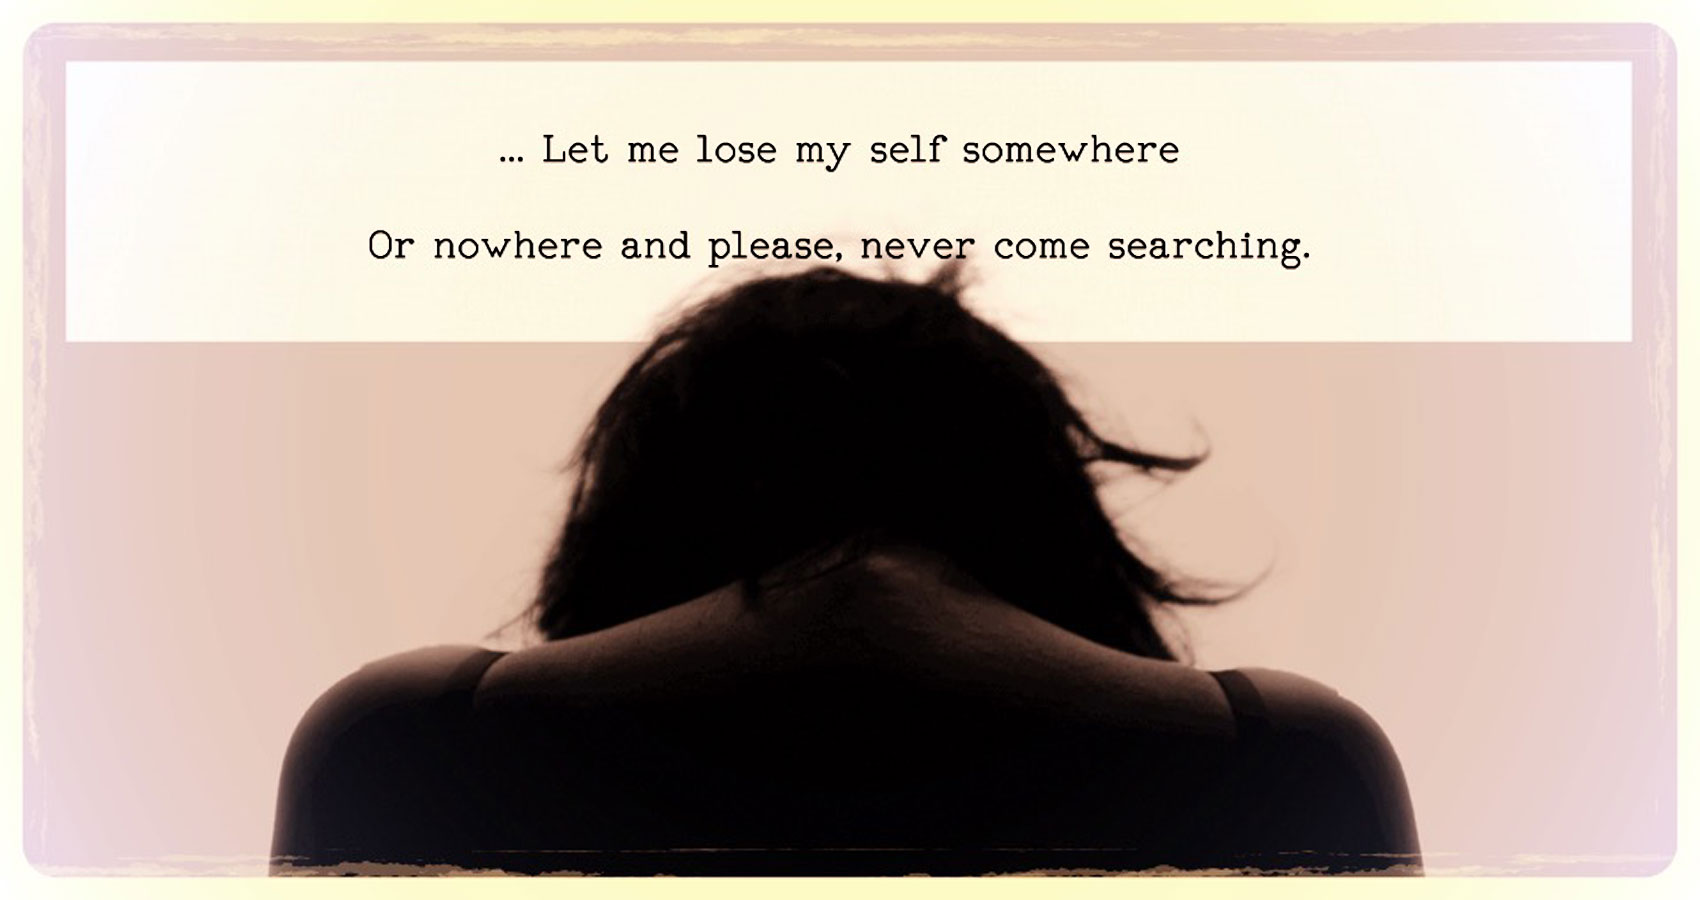 Lost And Unfound, written by Kabrie Waters at Spillwords.com